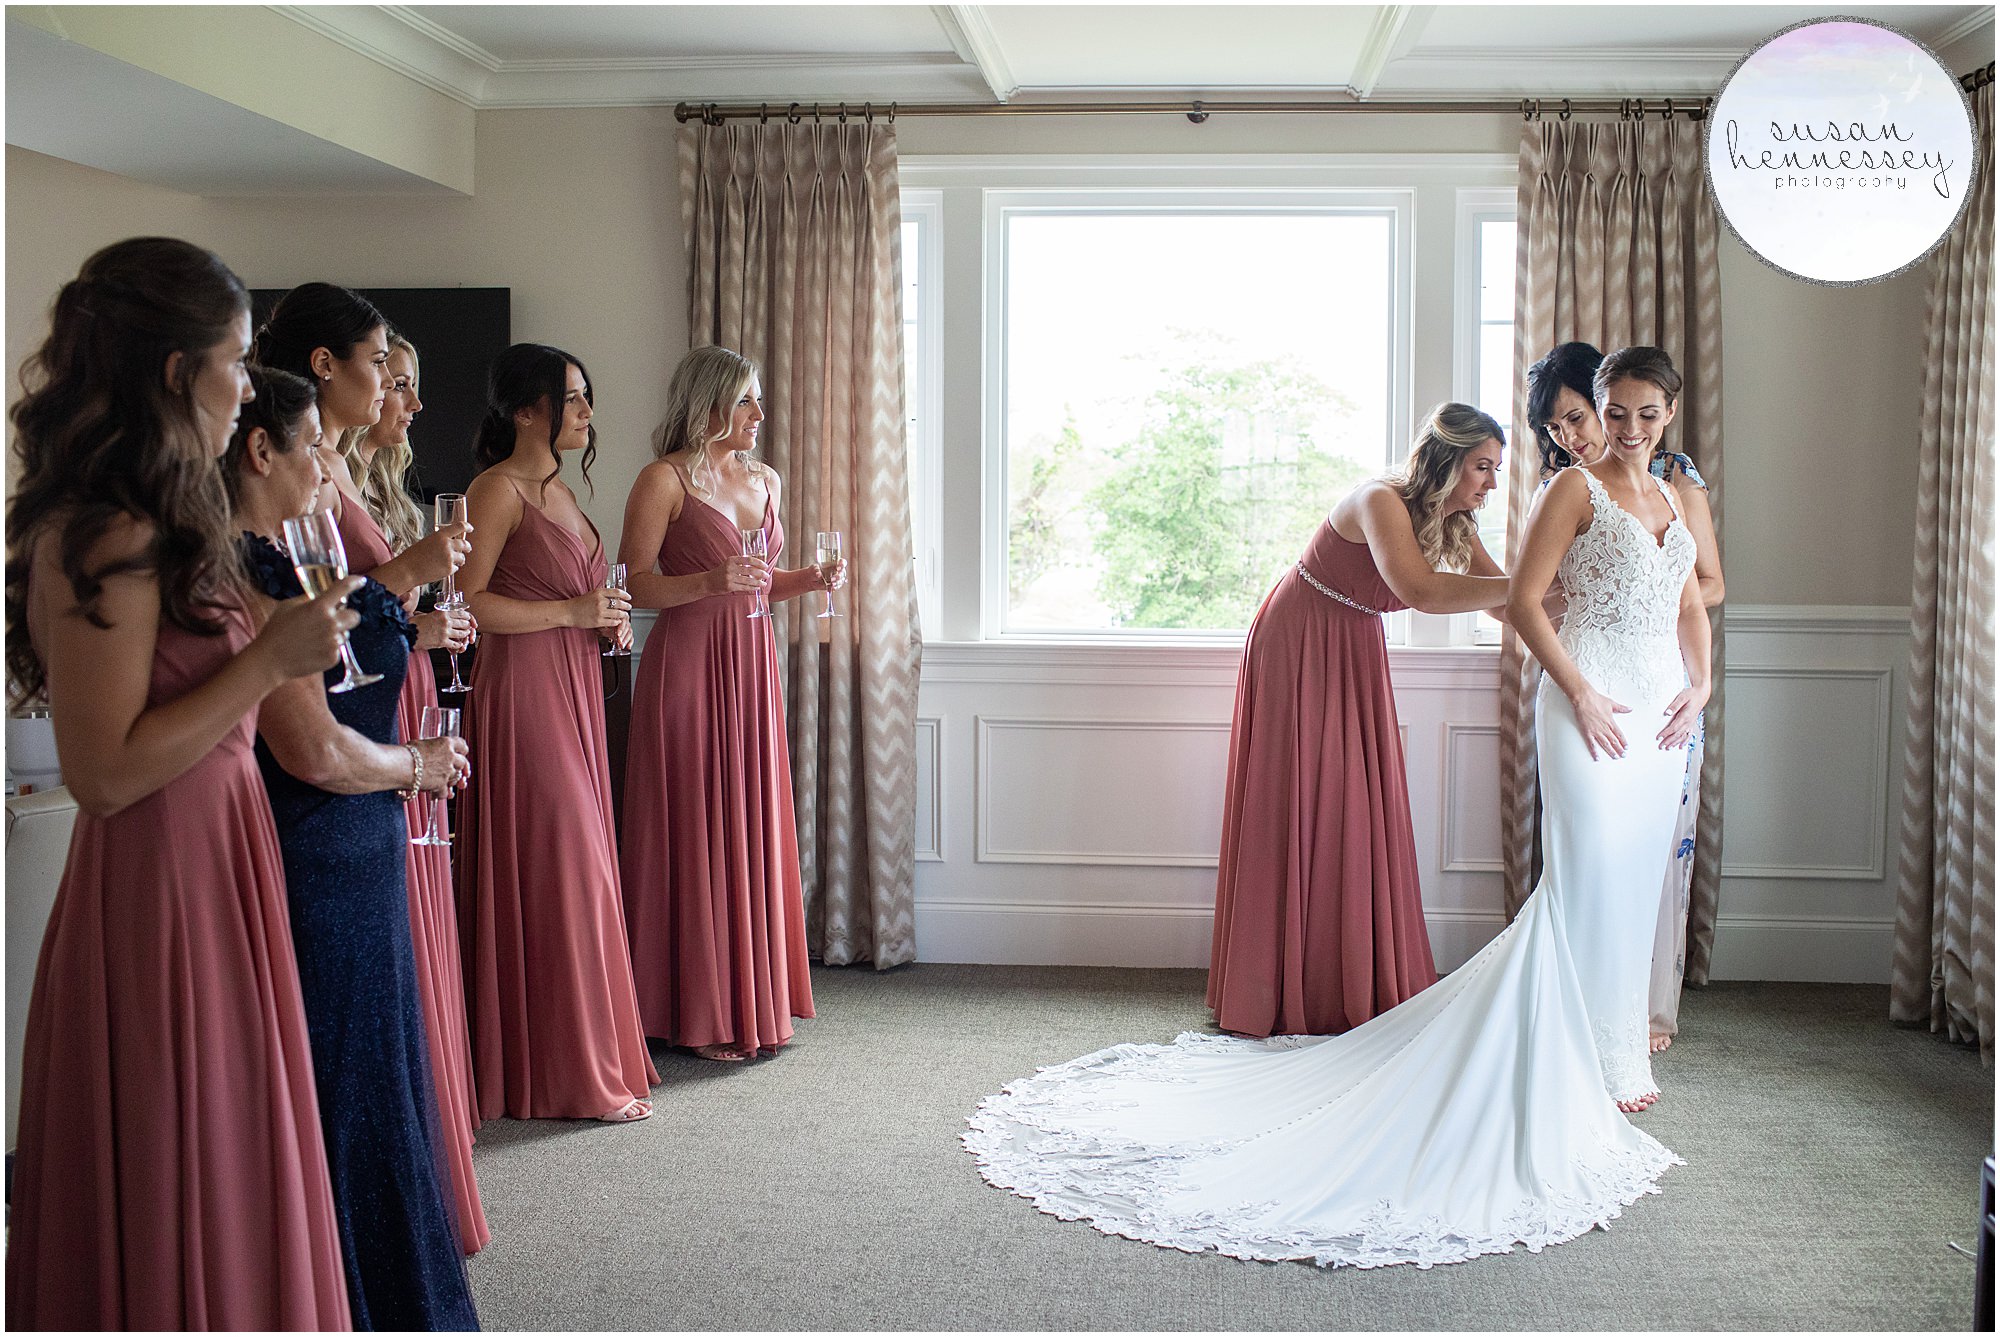 Susan Hennessey Photography Best of 2020 Weddings - Atlantic City Country Club wedding bride gets dressed